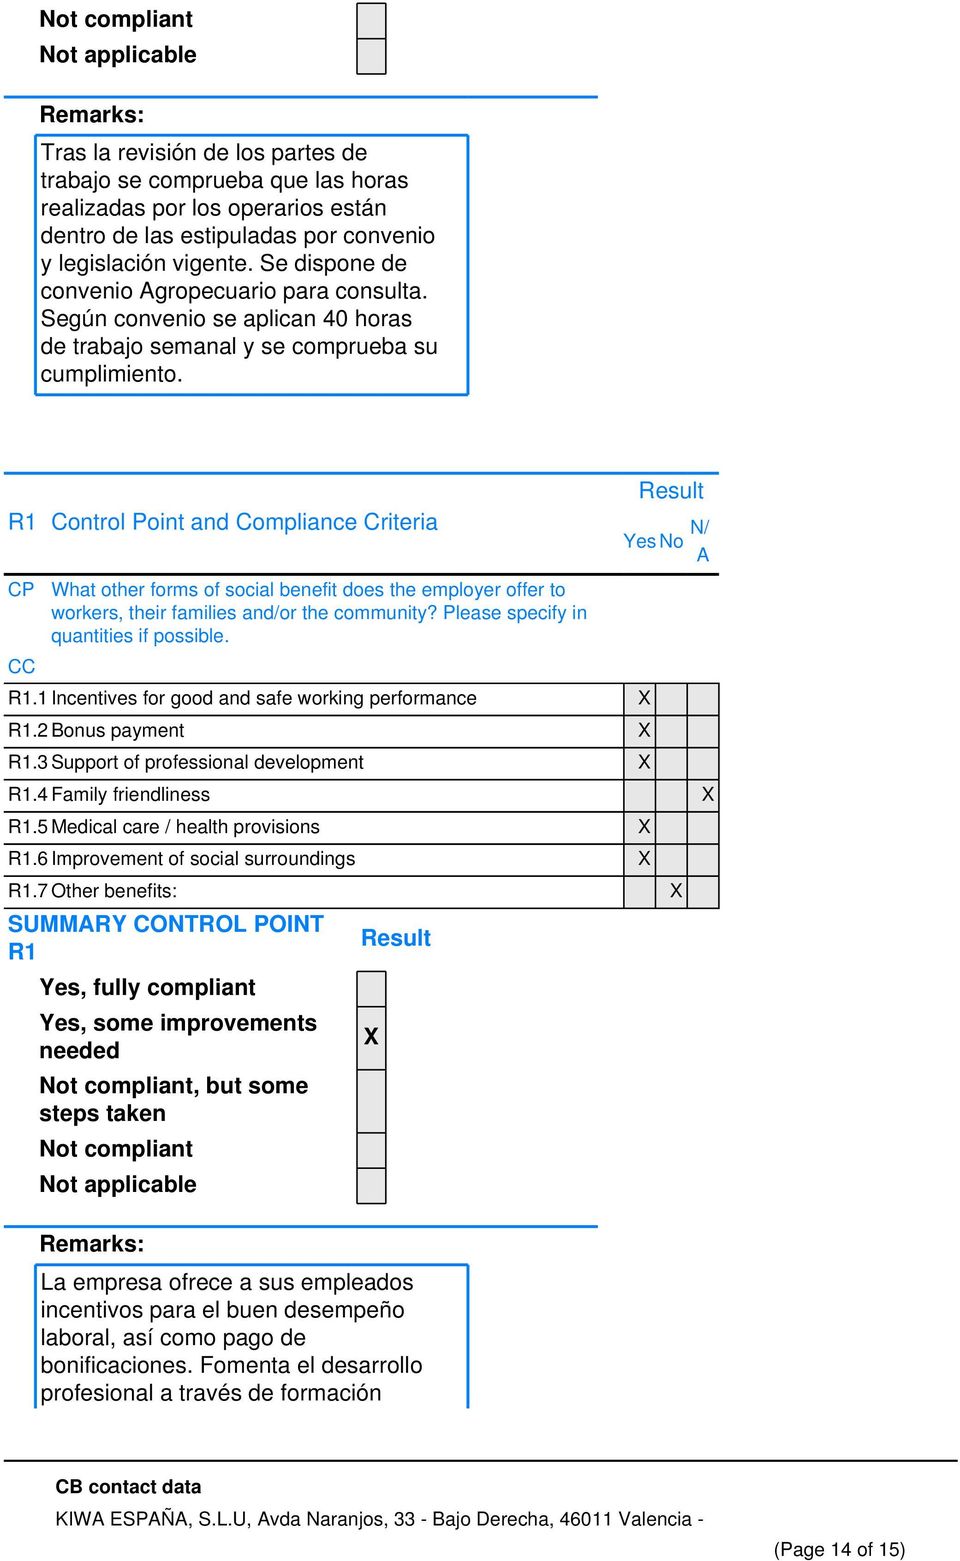 R1 Control Point and Compliance Criteria What other forms of social benefit does the employer offer to workers, their families and/or the community? Please specify in quantities if possible. R1.